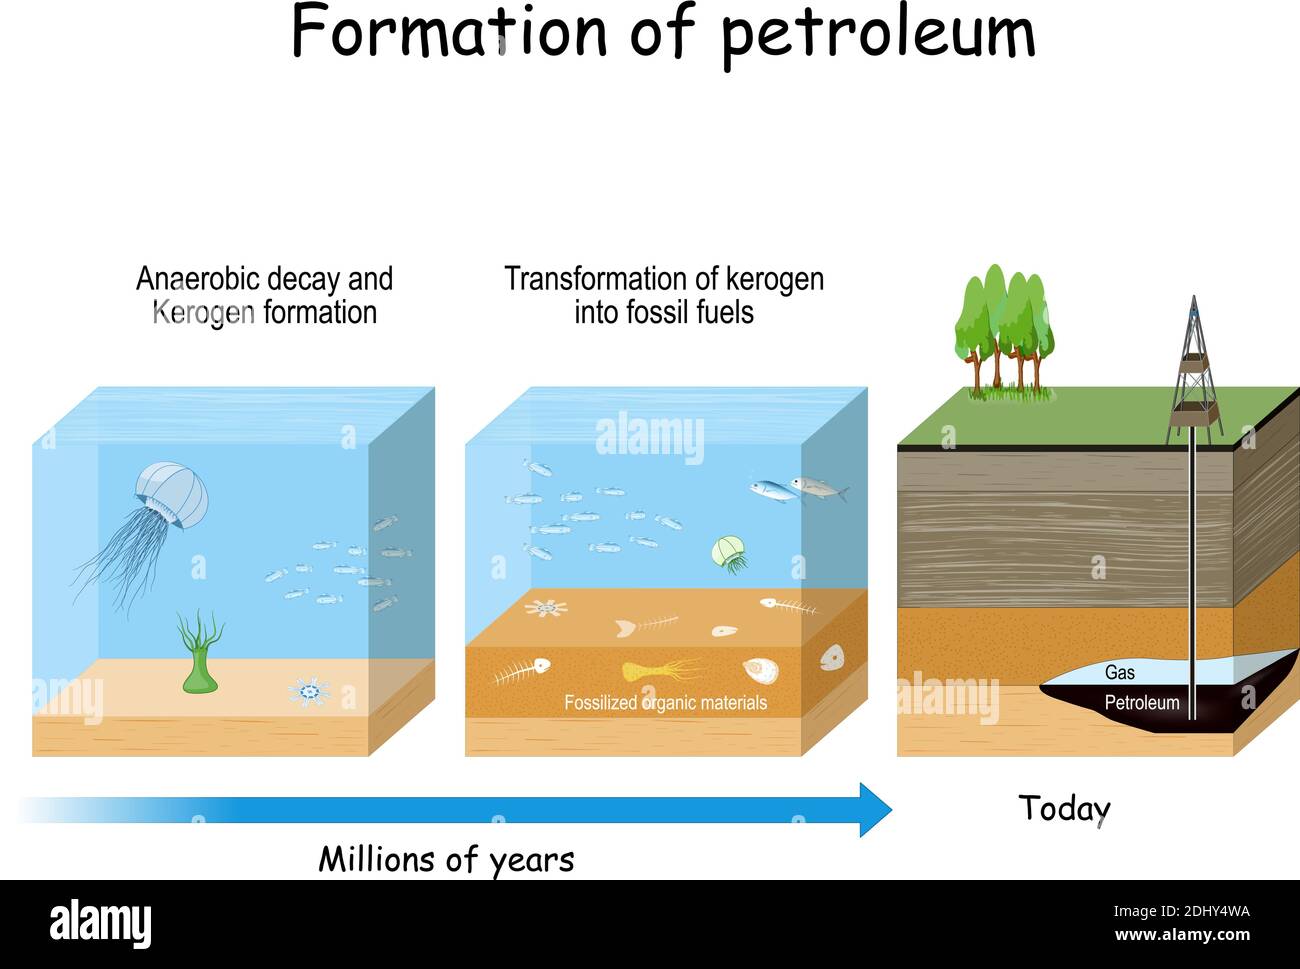 Formation of petroleum. Oil and gas formation. fossil fuel derived from ancient fossilized organic materials. Stock Vector